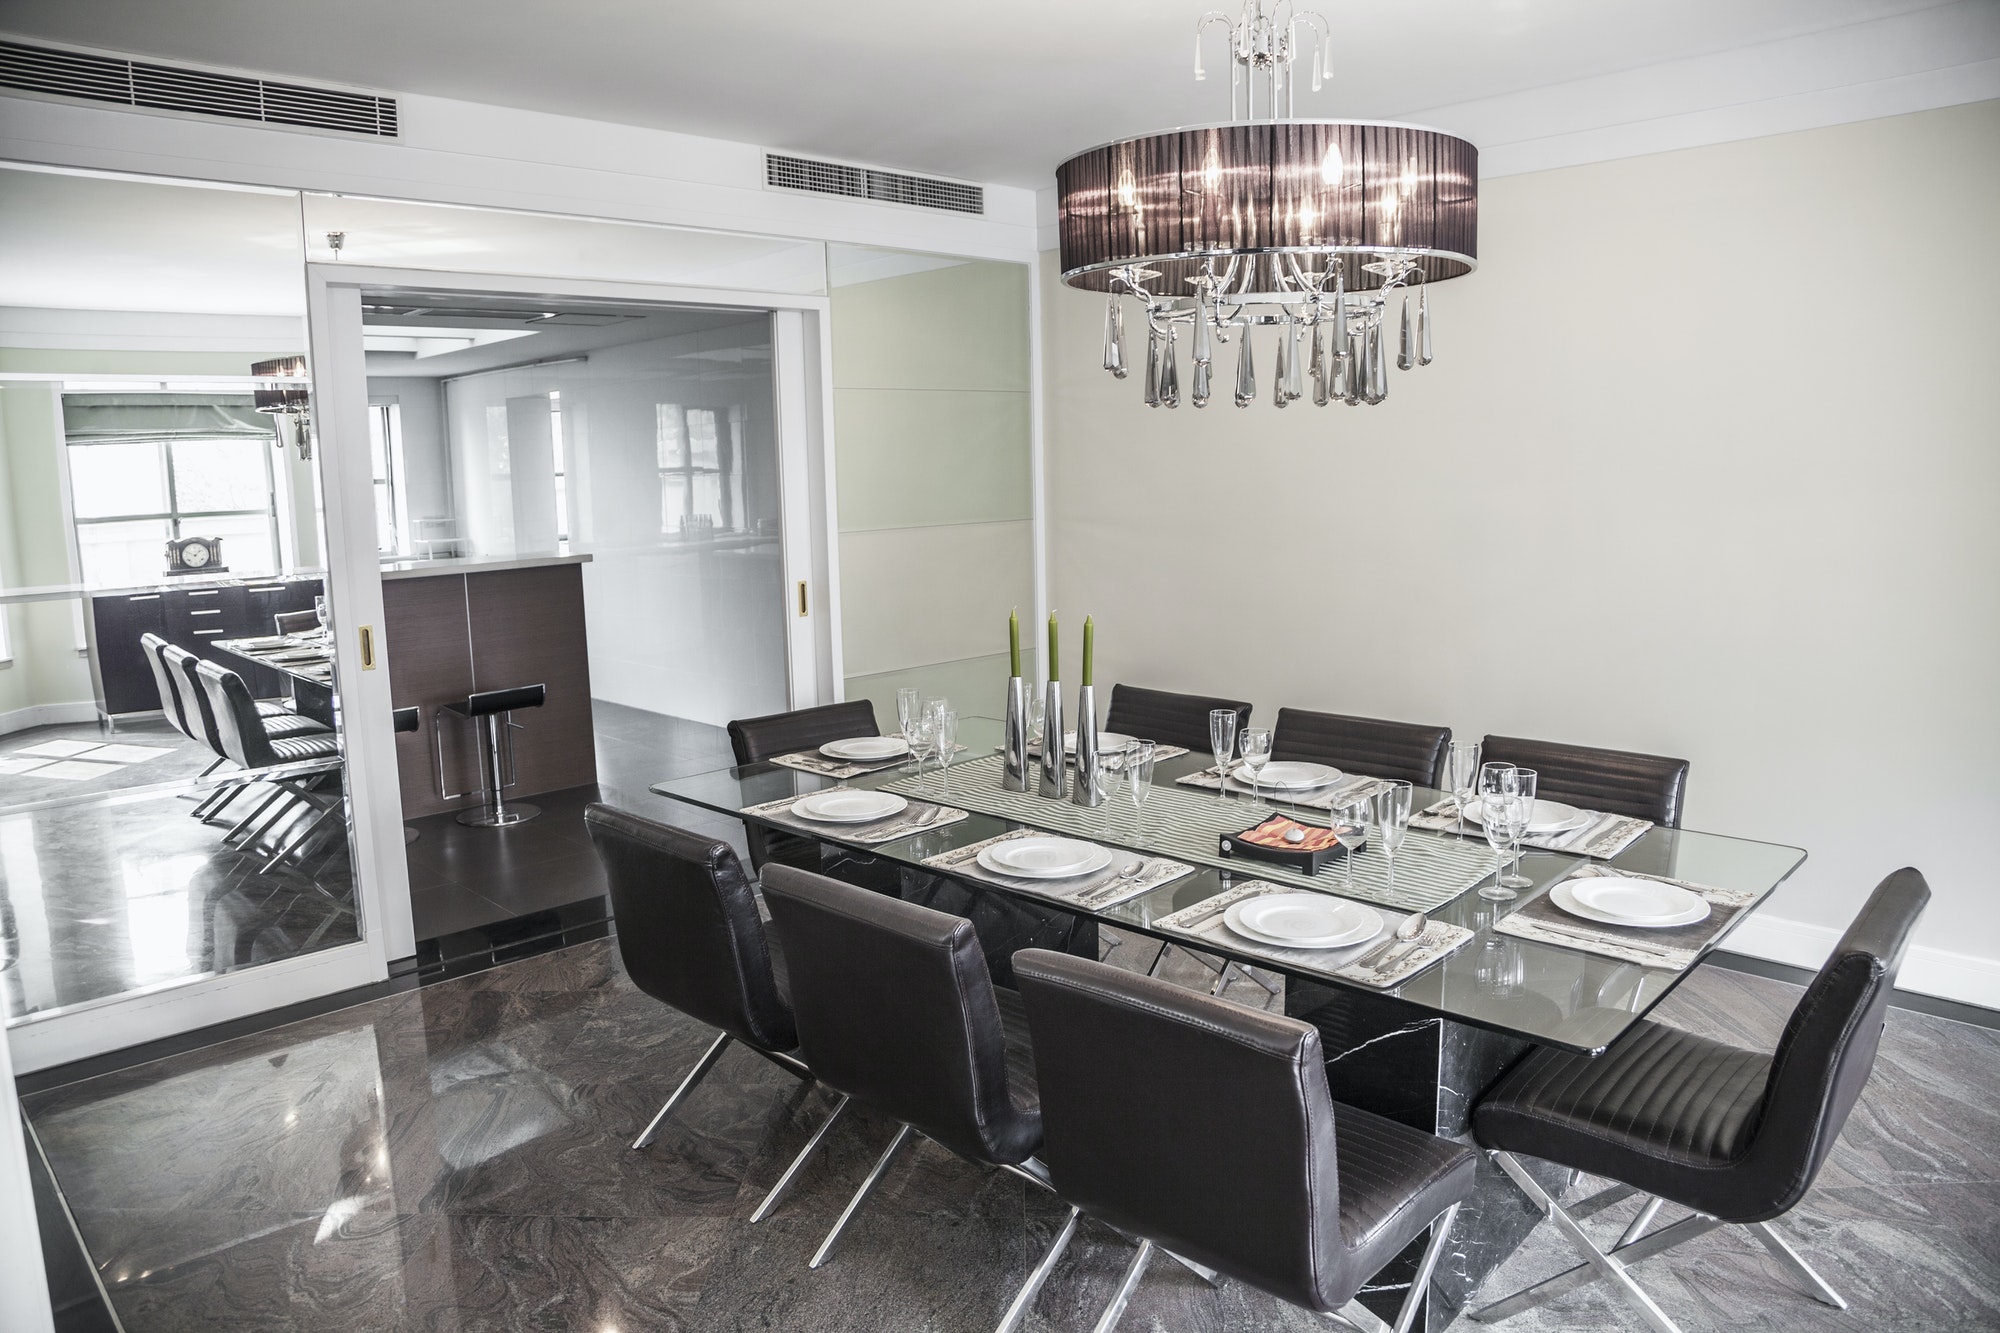 Dining room with modern furniture and chandelier.